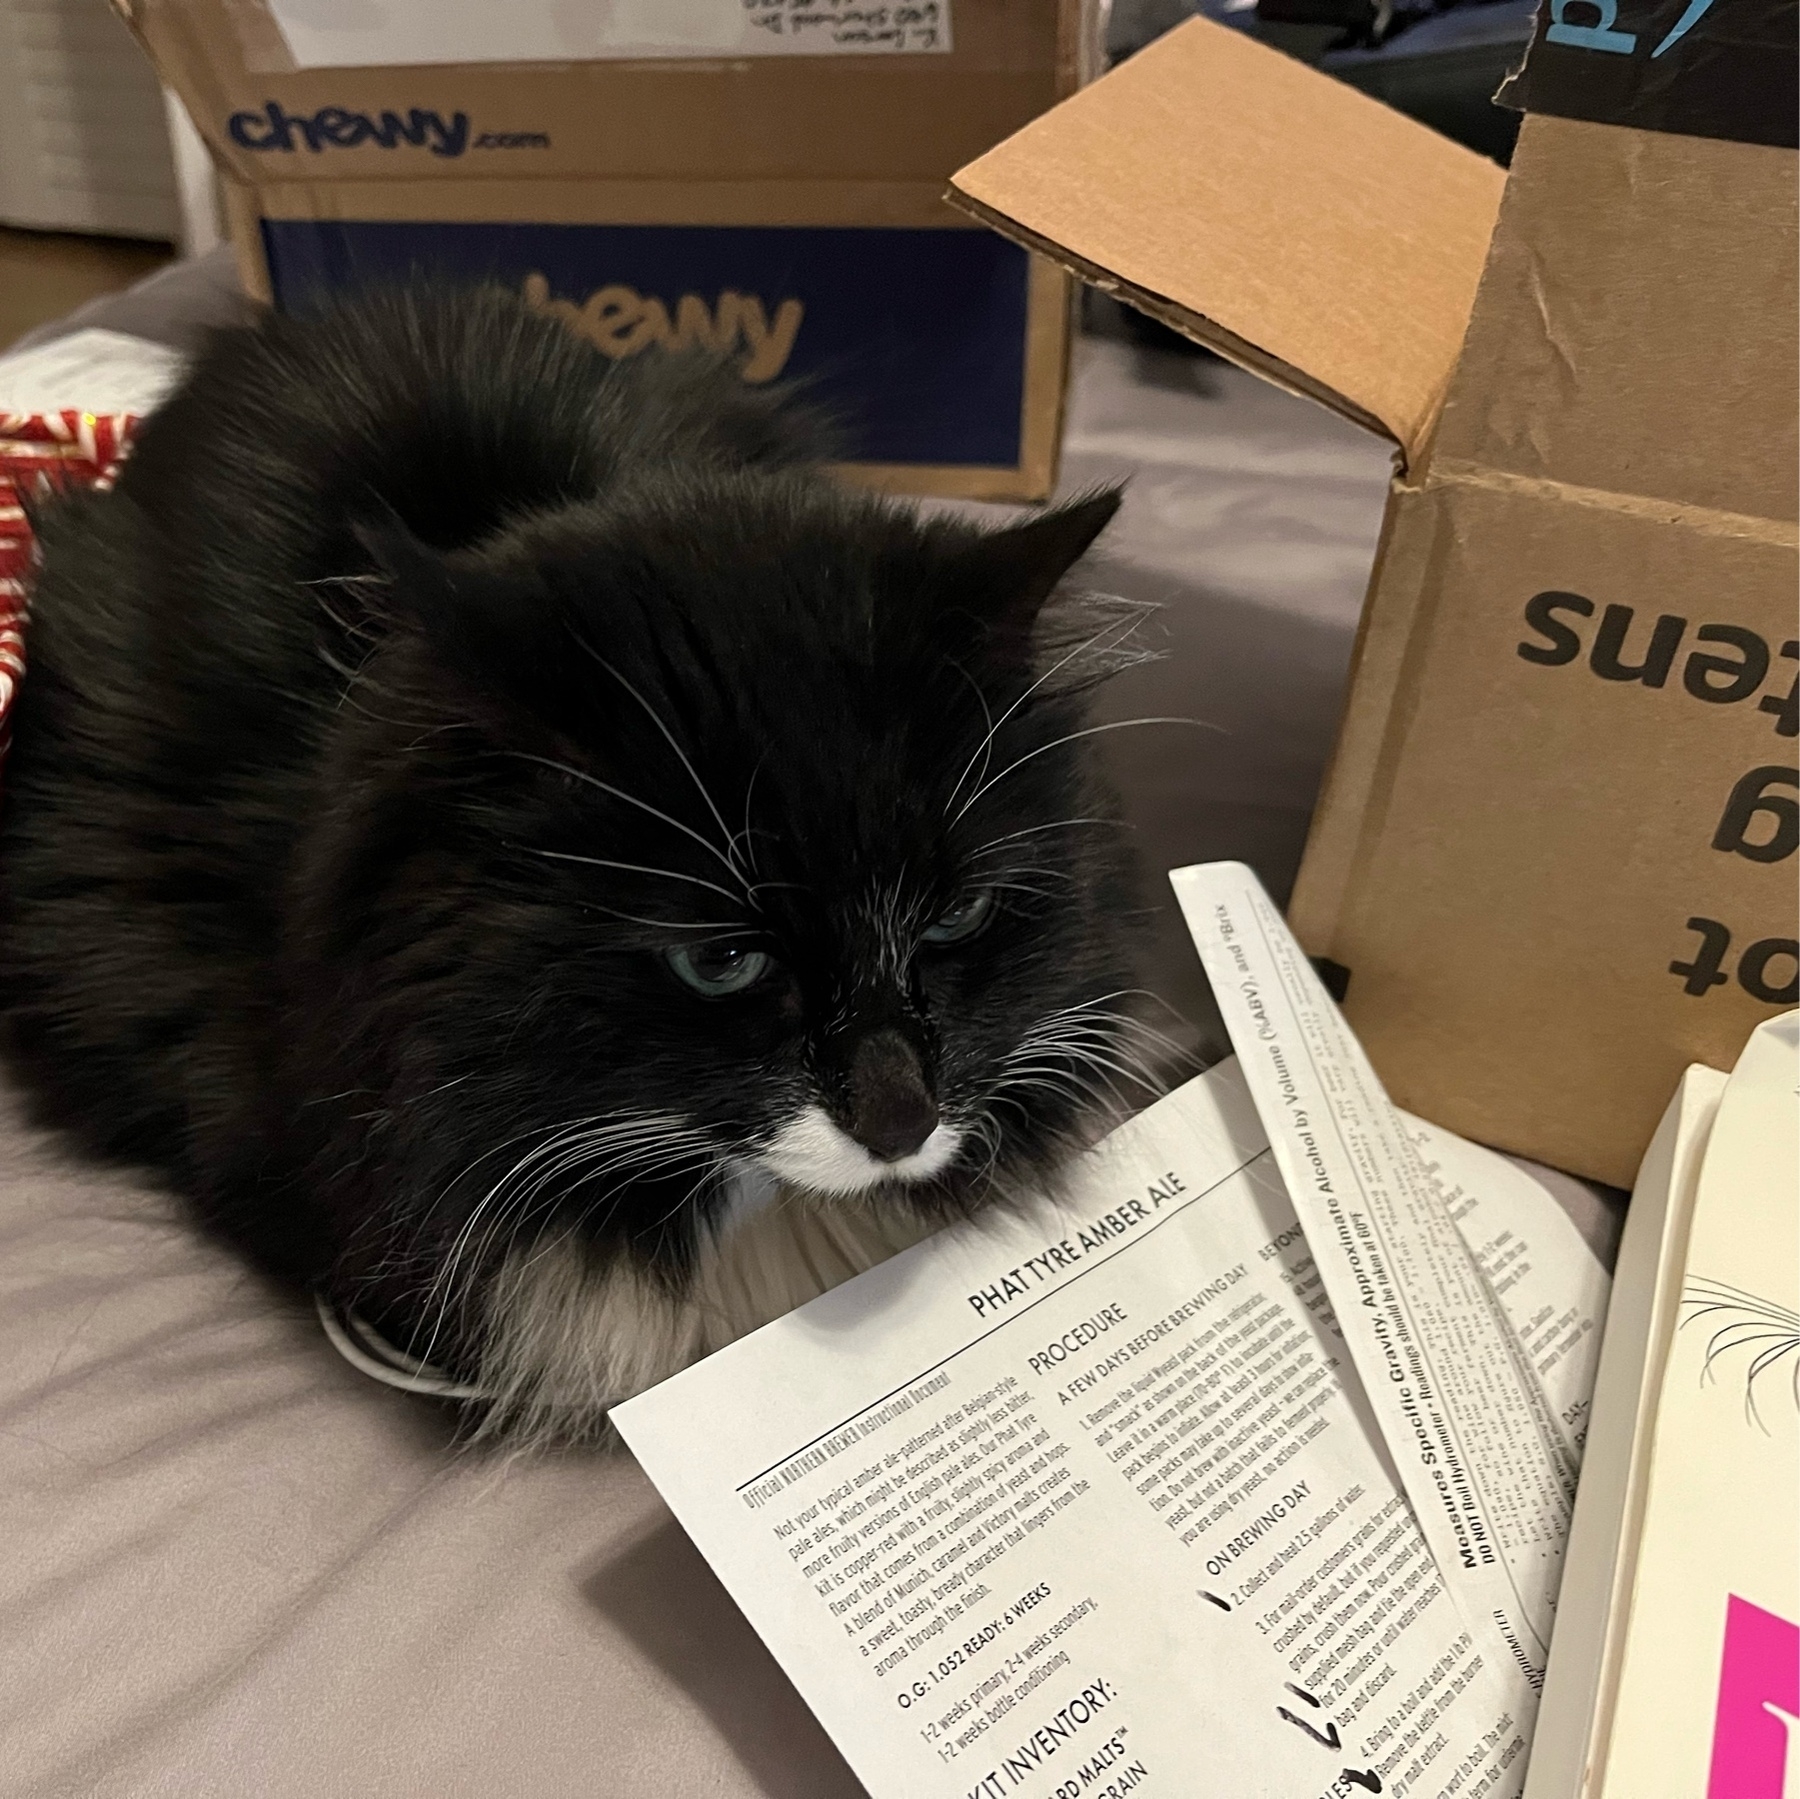 a tuxedo cat loafing in the middle of random objects including a Python refebcd book, a box, and a basket